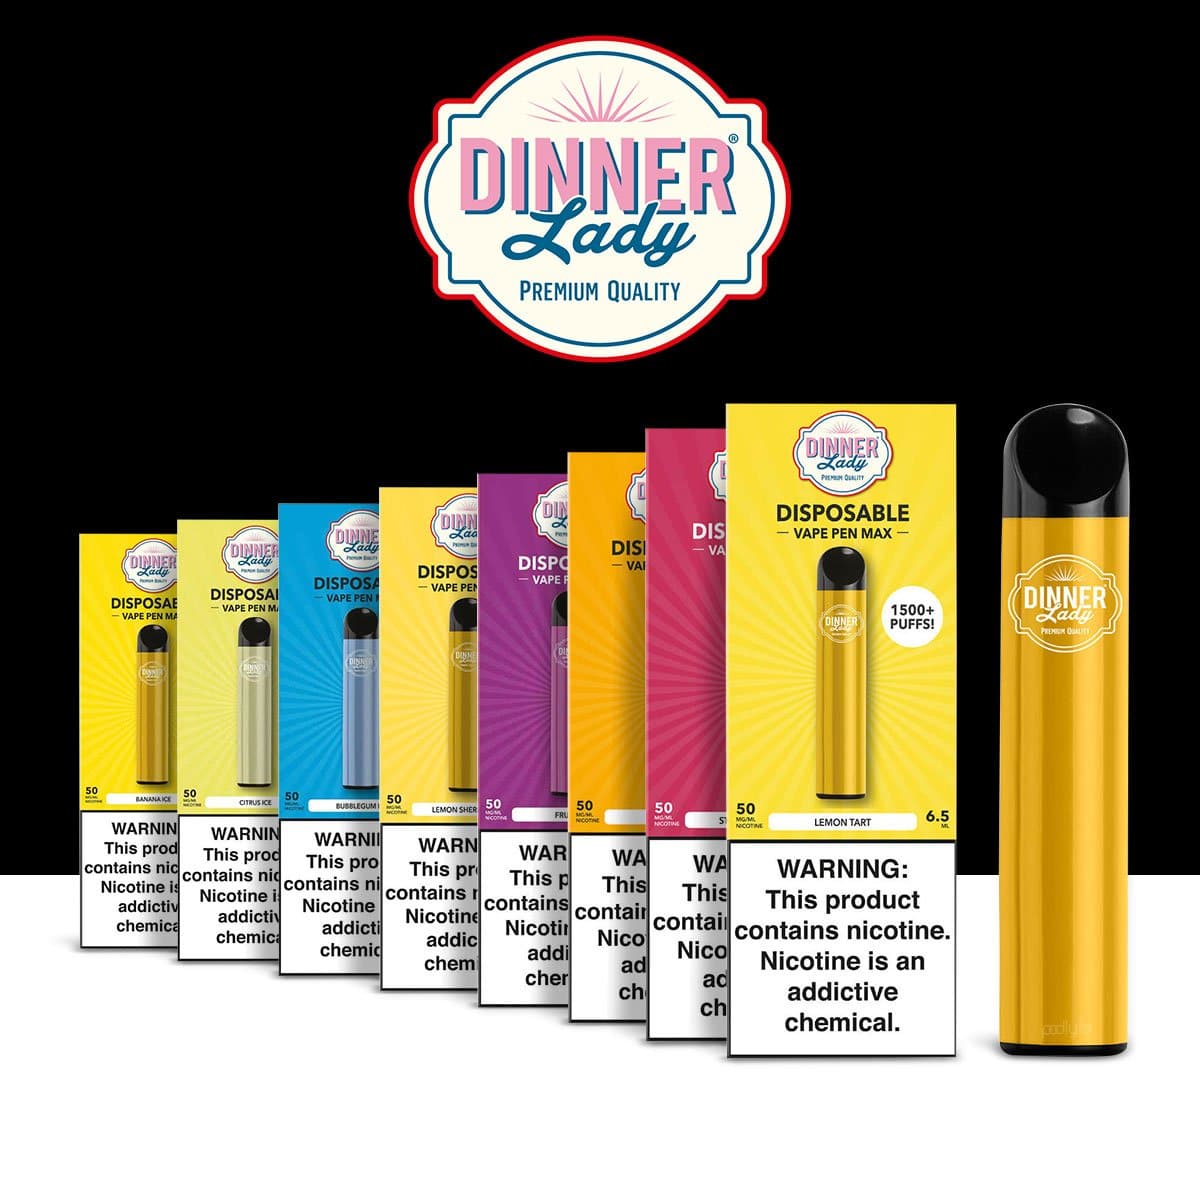 Dinner Lady Vape Pen Max Disposable Pod System Fruit Mix Single Pack 30mg (3%) nicotine vape available in Australia